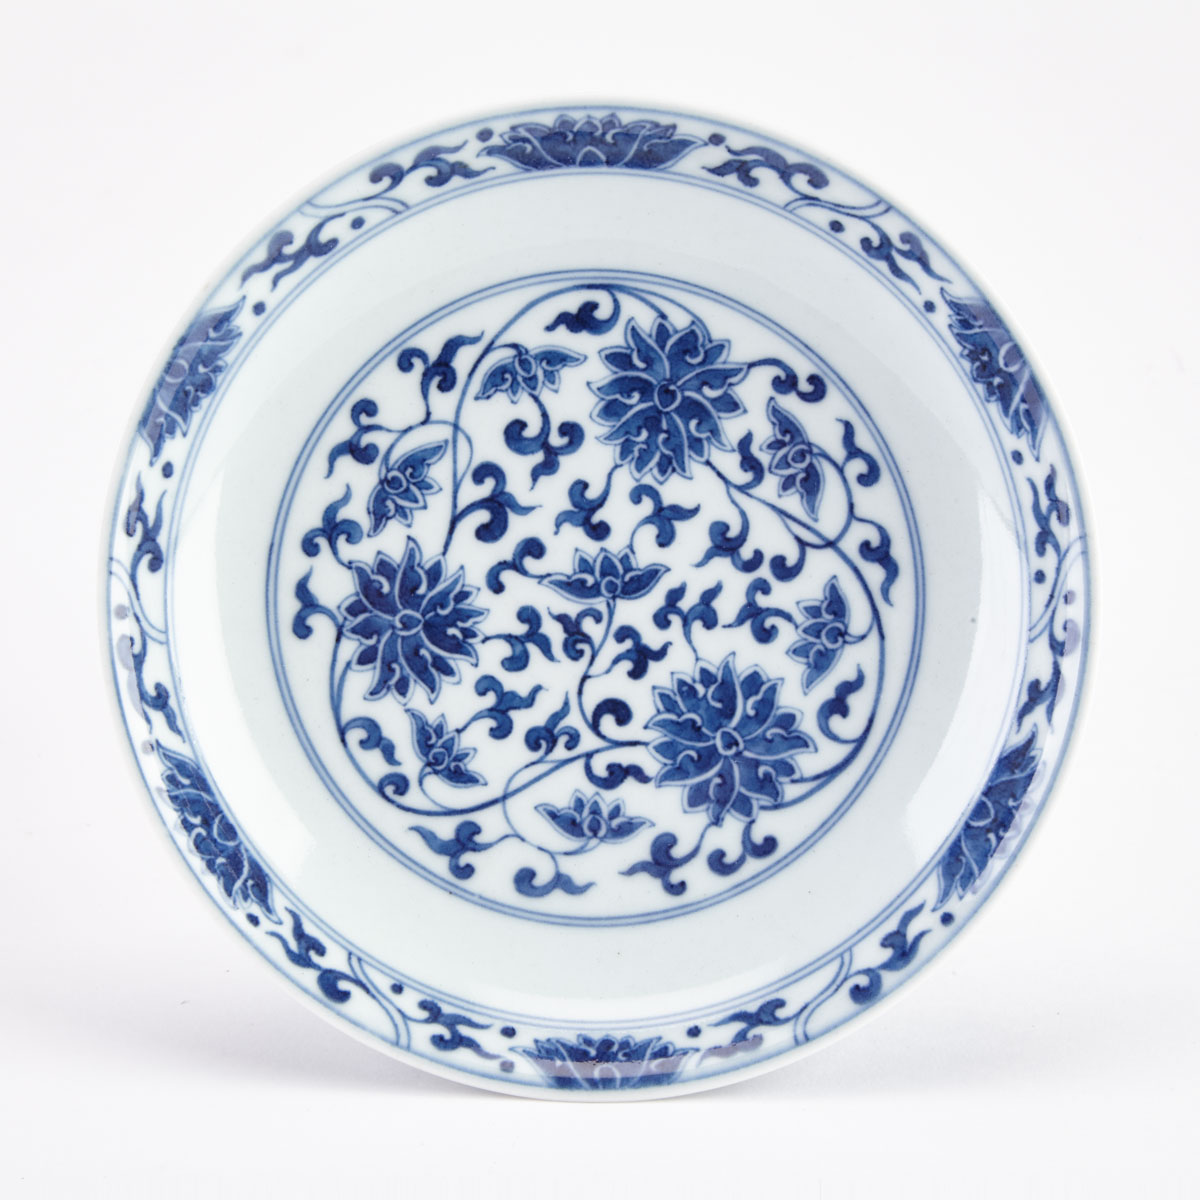 A Blue and White Lotus Dish, Guangxu Mark and Period (1875-1908)